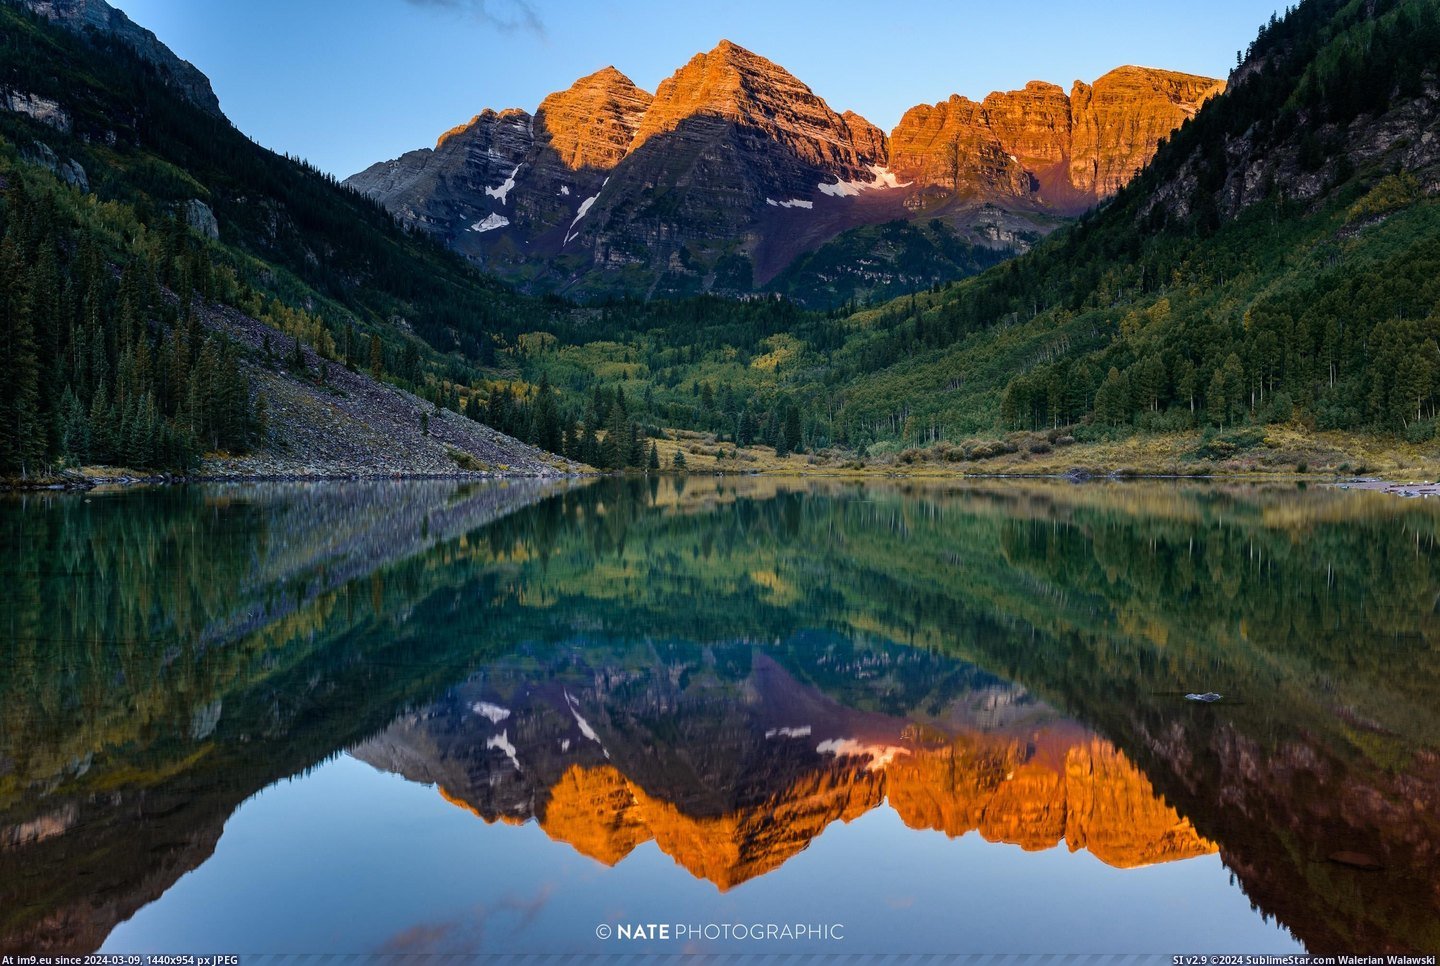 #Shots #Sunrise #Card #Maroon #Memory #Hiked #Battery #Died #Bells #Stranger [Earthporn] Hiked to Maroon Bells, CO for sunrise. Battery died. A stranger let me take a few shots with my memory card in his c Pic. (Изображение из альбом My r/EARTHPORN favs))